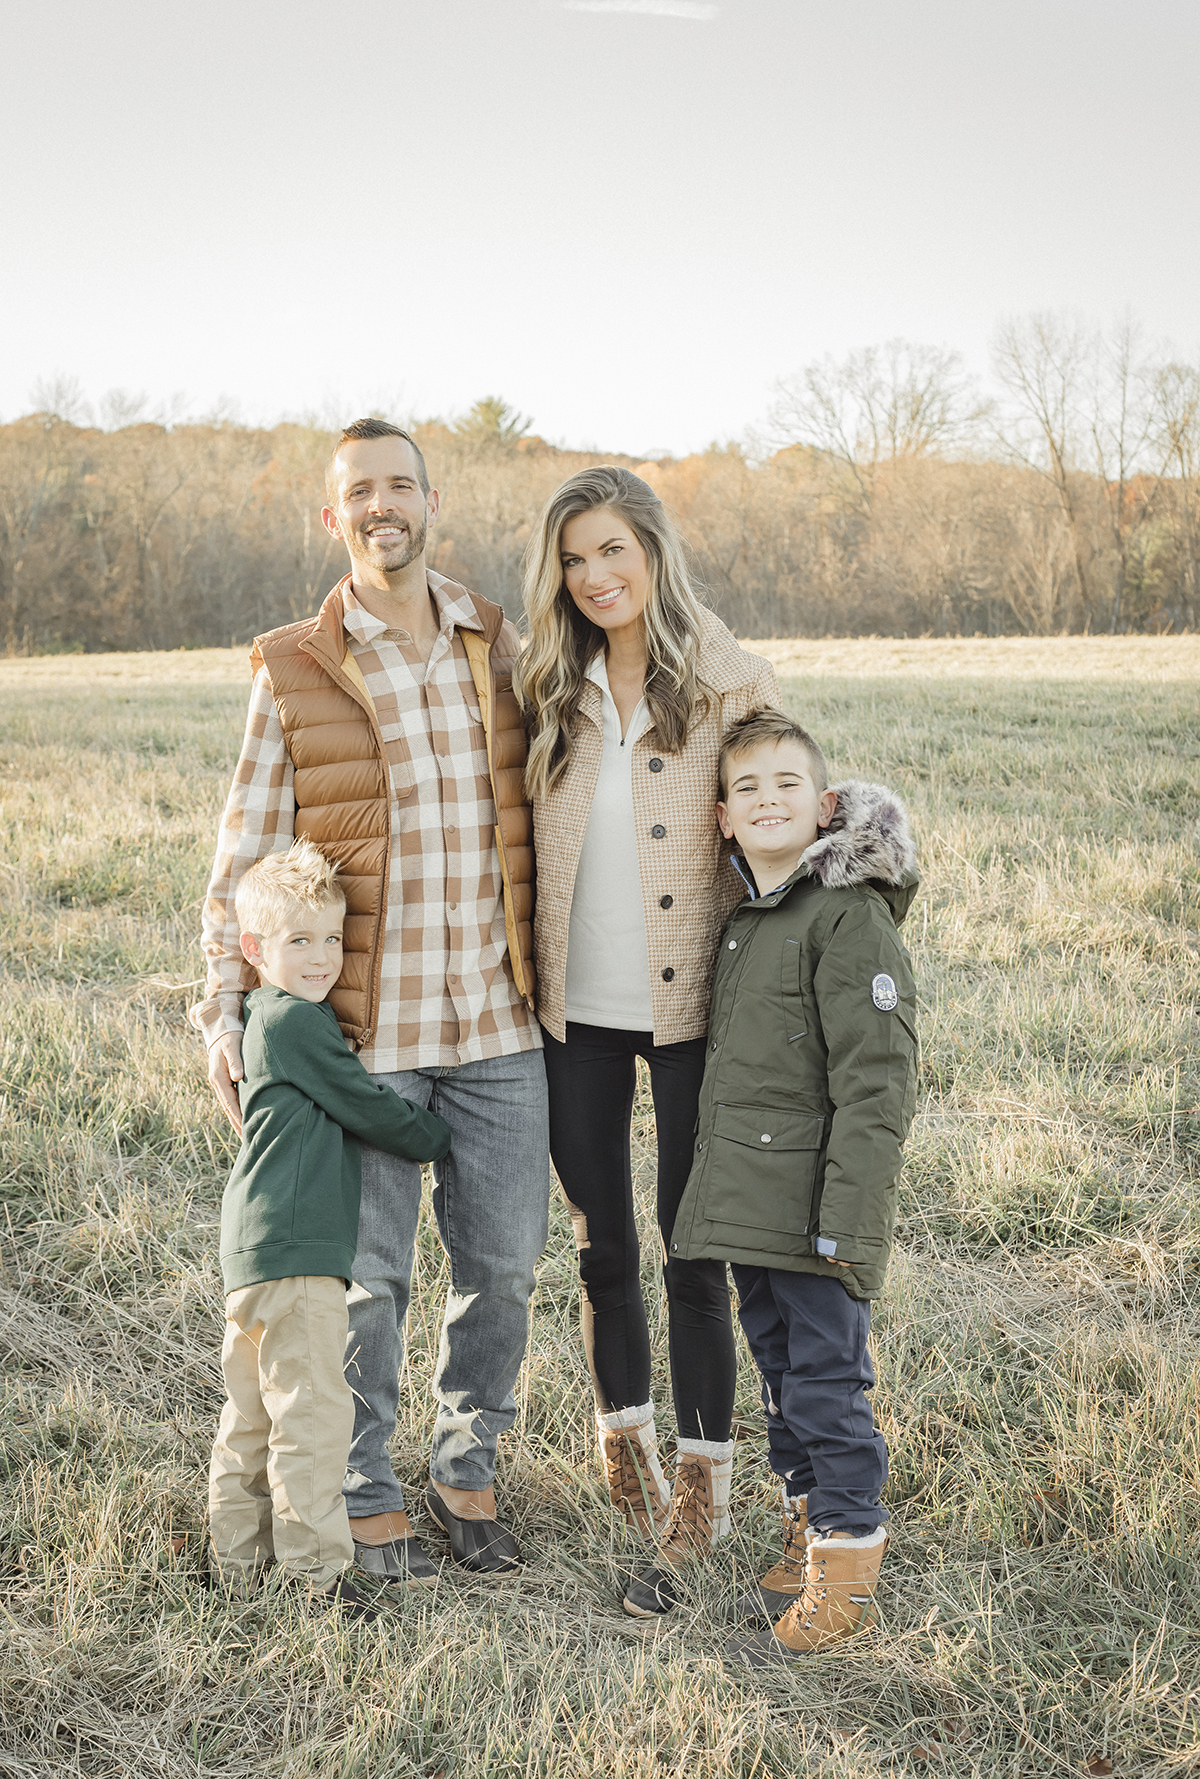 outdoor-fall-family-photo-outfits-pinteresting-plans